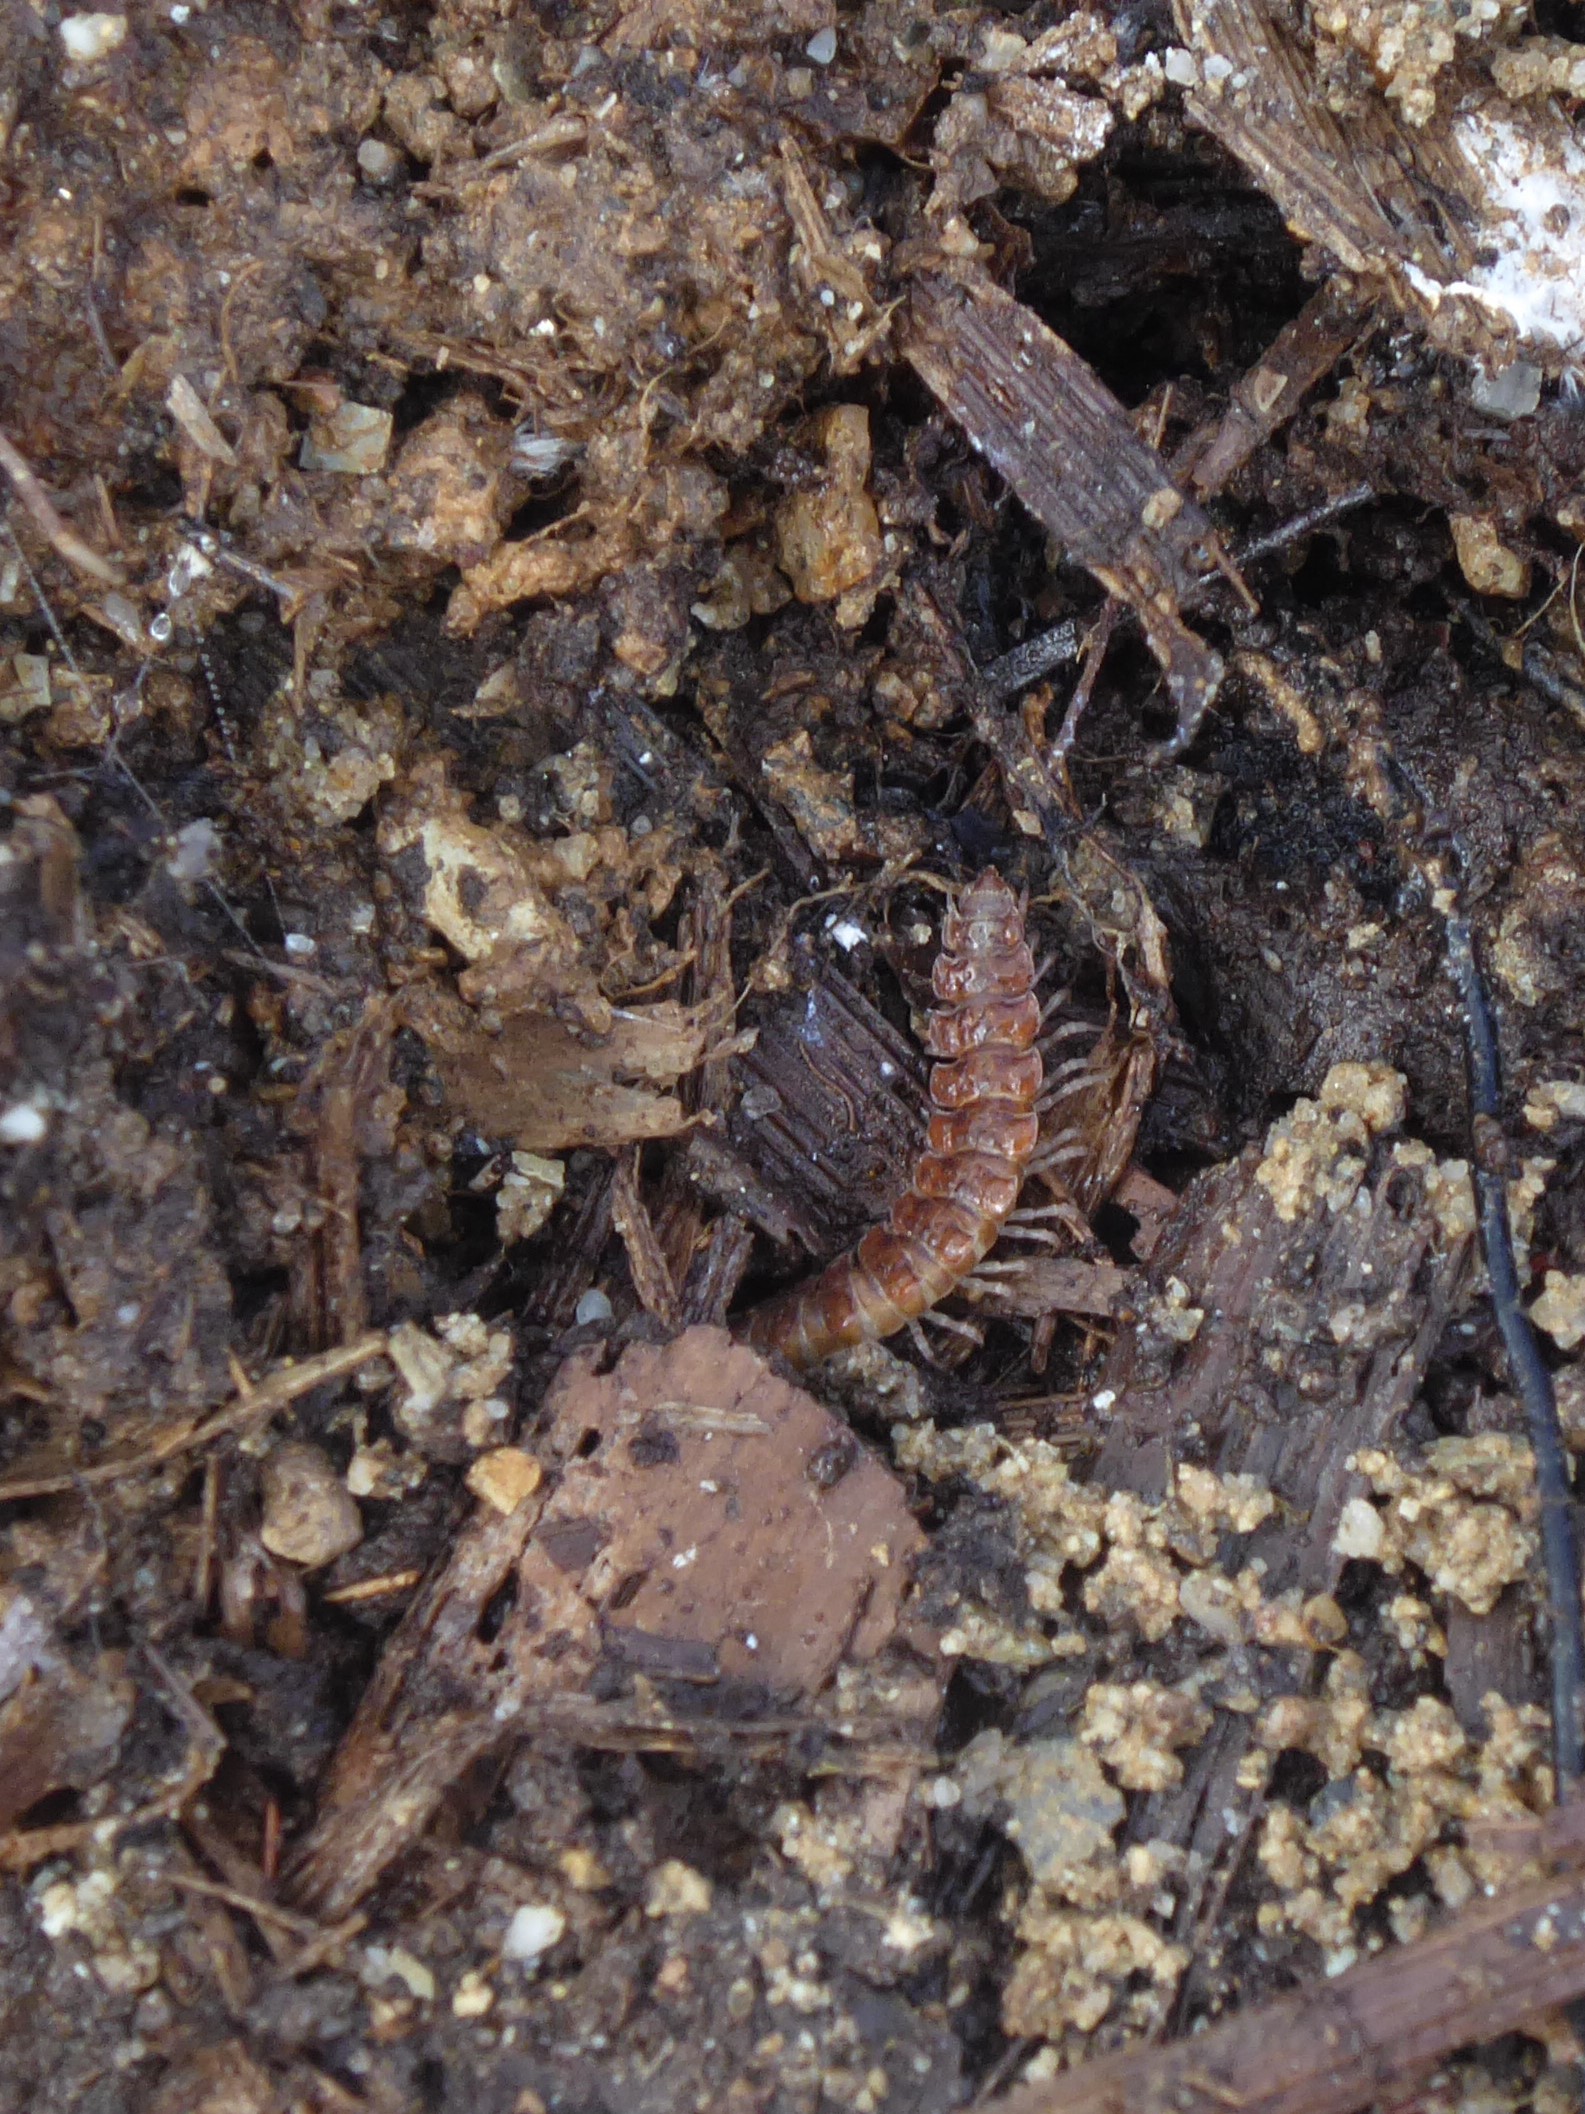 Flat-backed millipede (Polydesmus angustus)